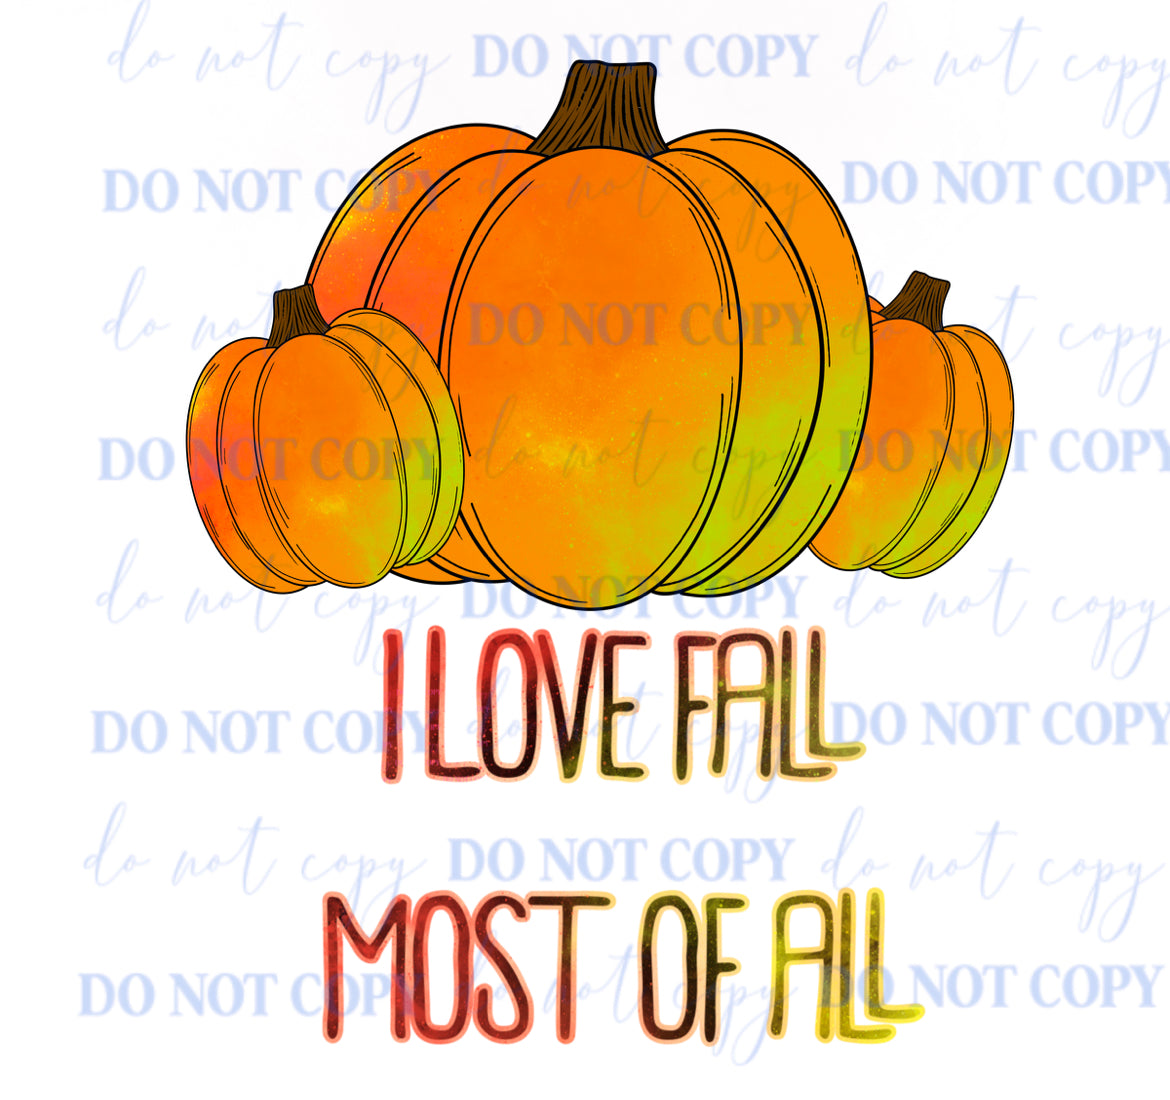 D131 love fall most of all decal